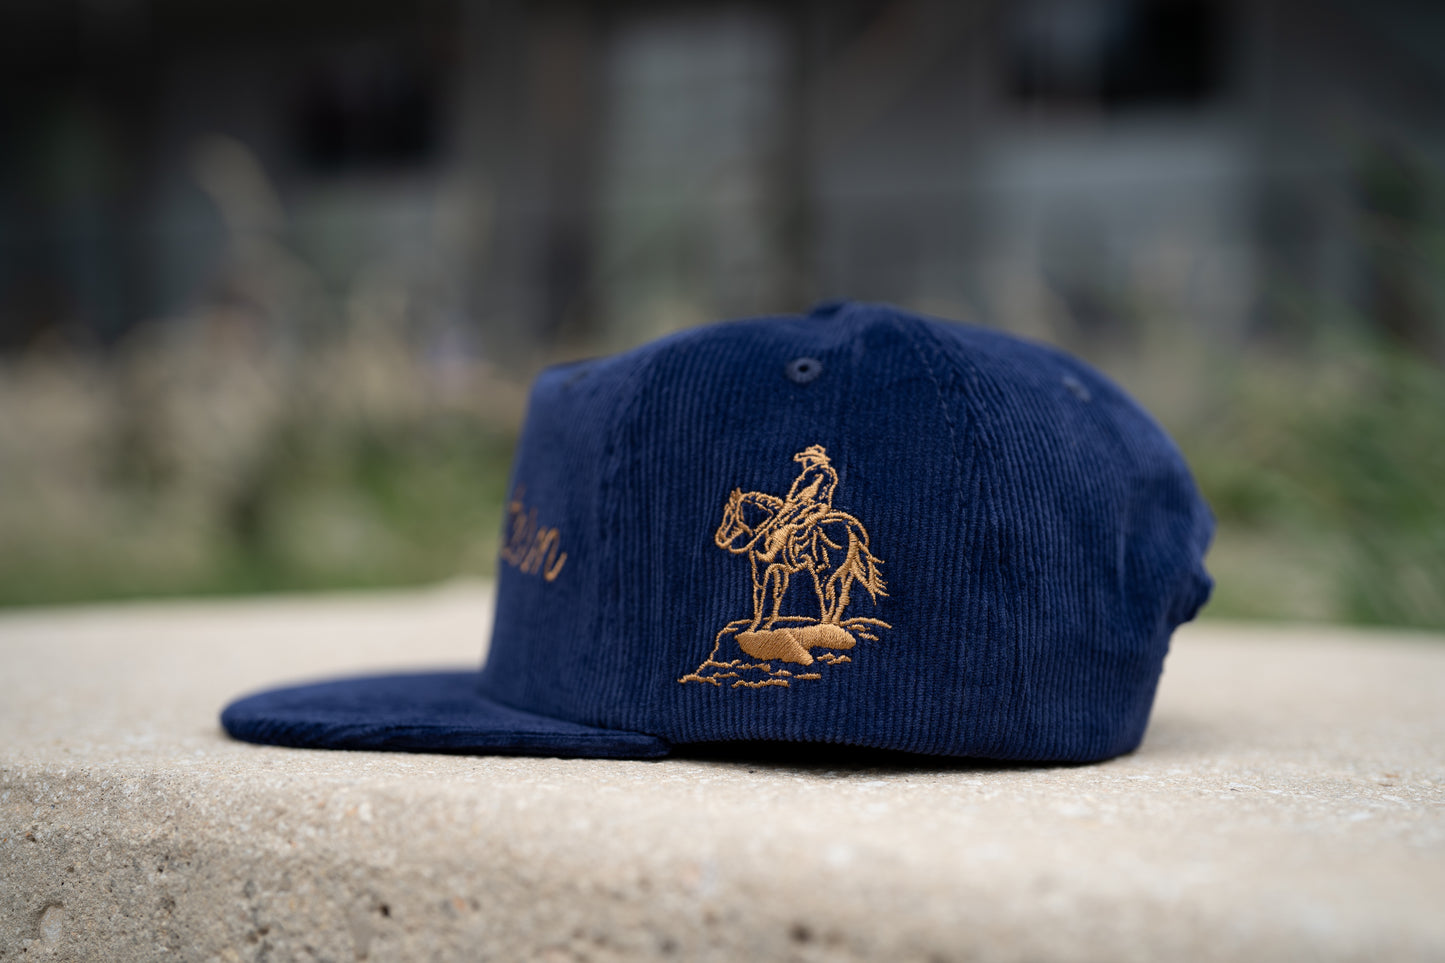 Epic Western Navy/Gold Cord Hat